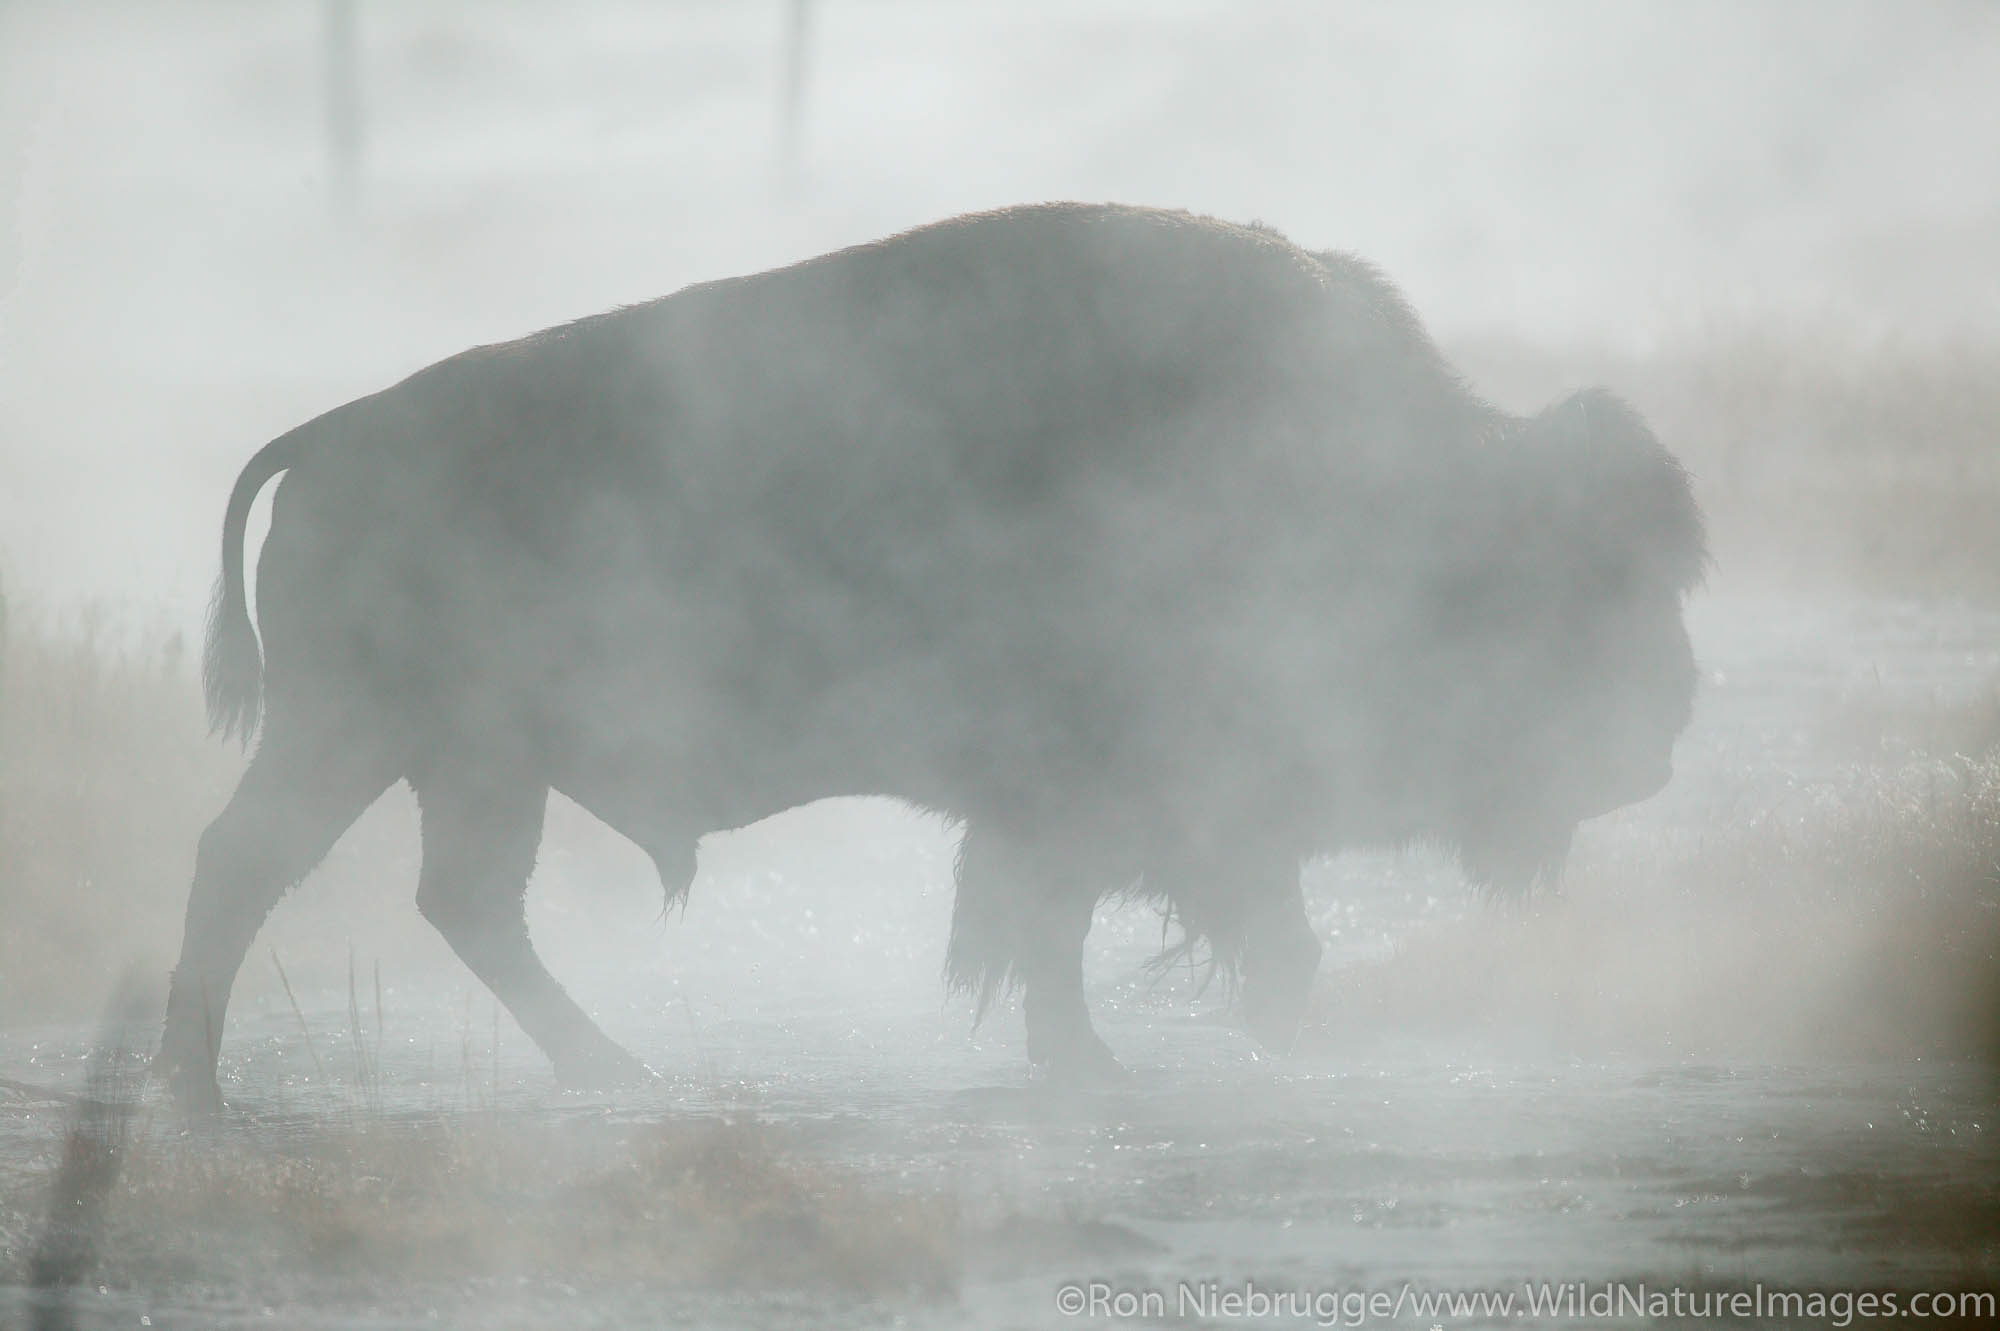 Bison in steam, Yellowstone National Park, Wyoming.